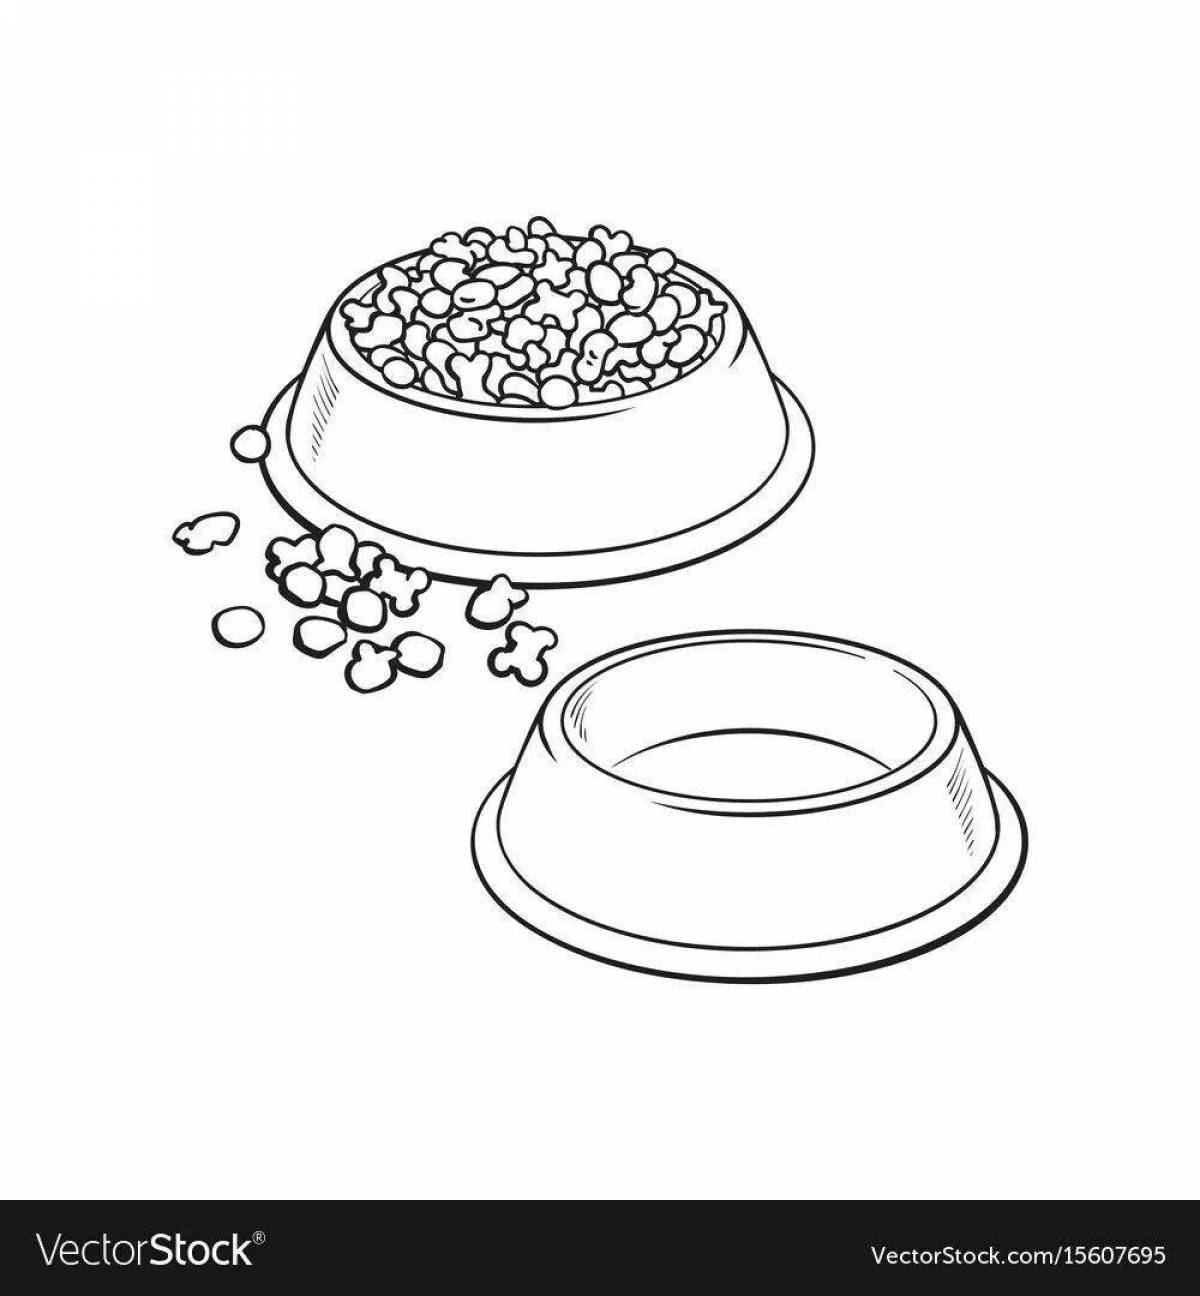 Glitter dog bowl coloring page